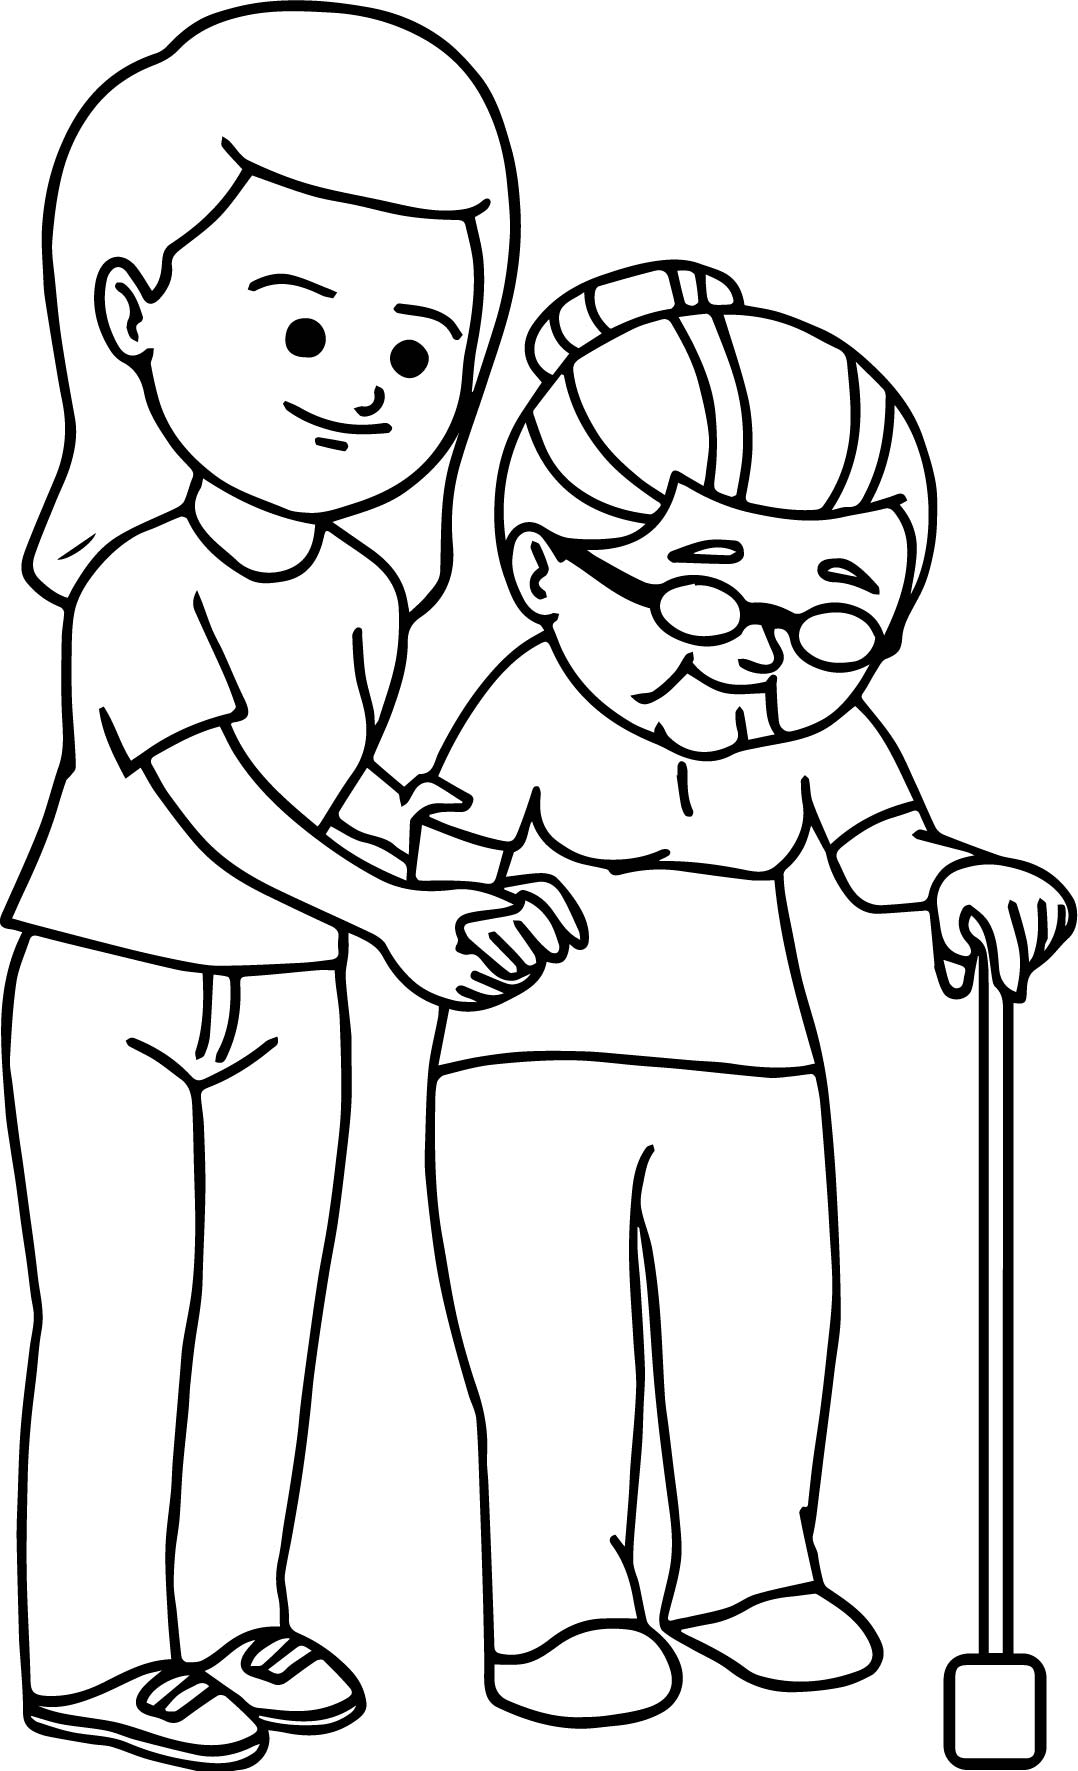 Helping Hands Coloring Page